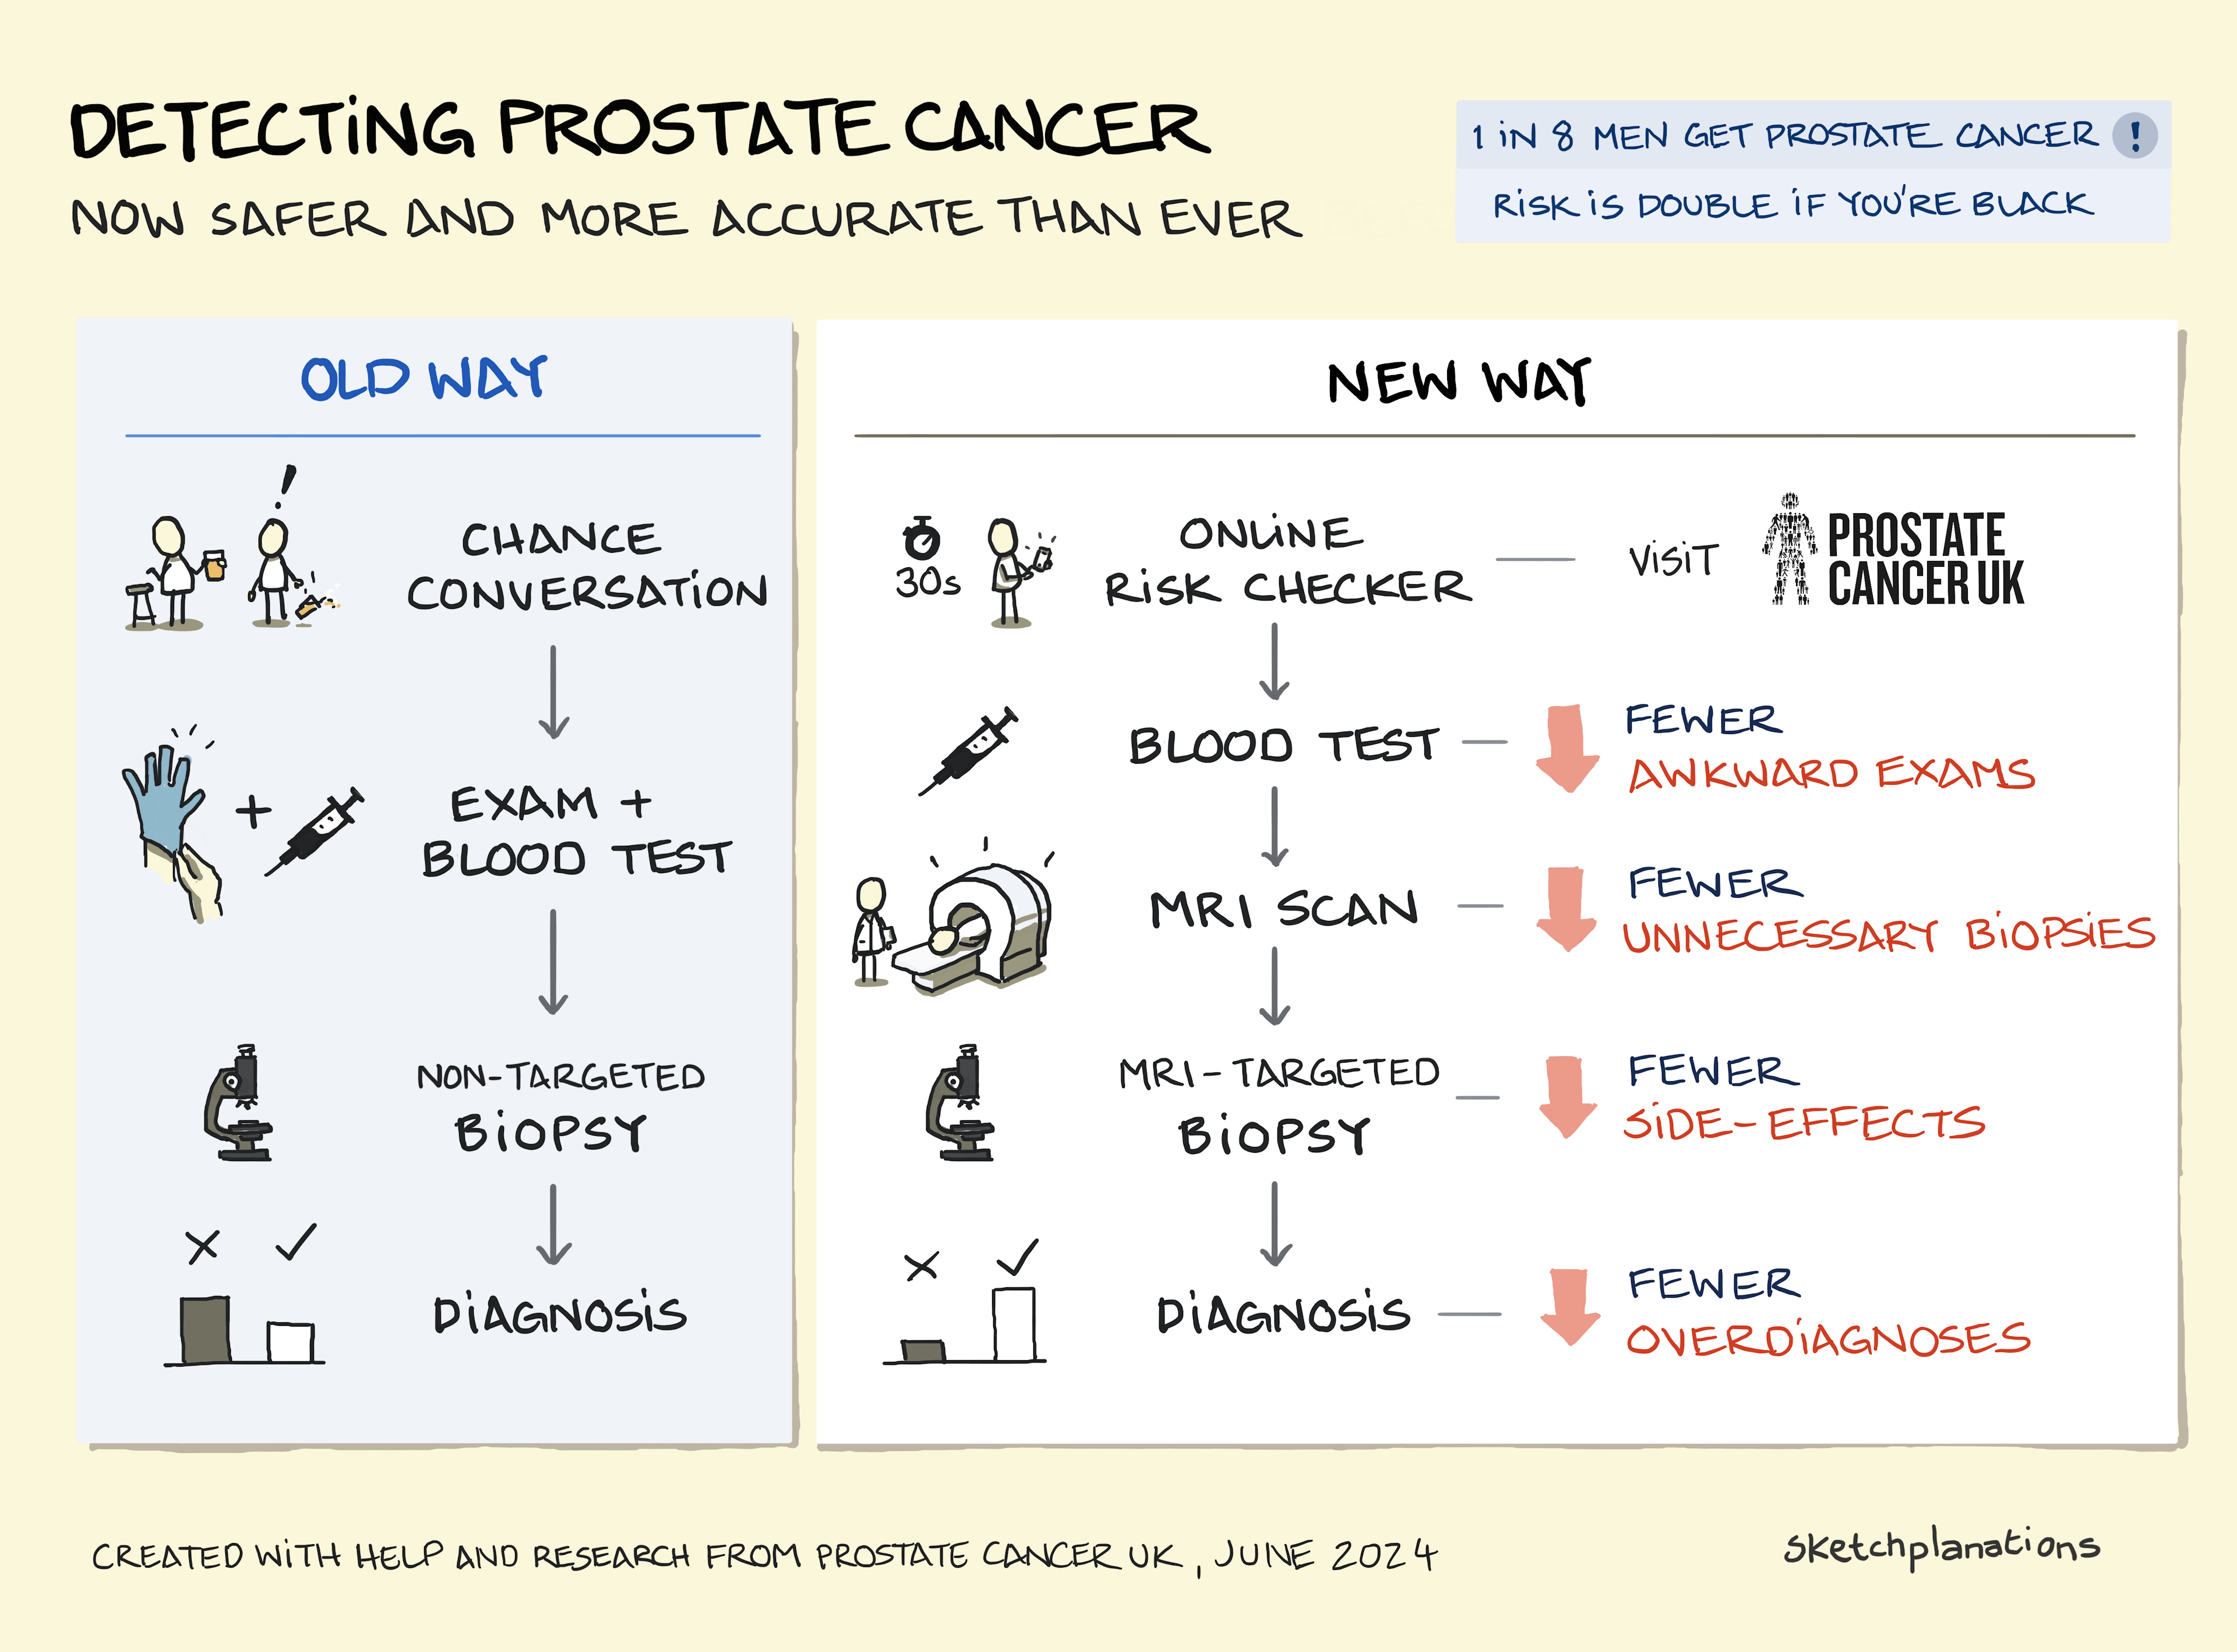 Detecting prostate cancer summary - how screening for prostate cancer has changed DRA, PSA blood test and MRI screening compared in the old way and new way